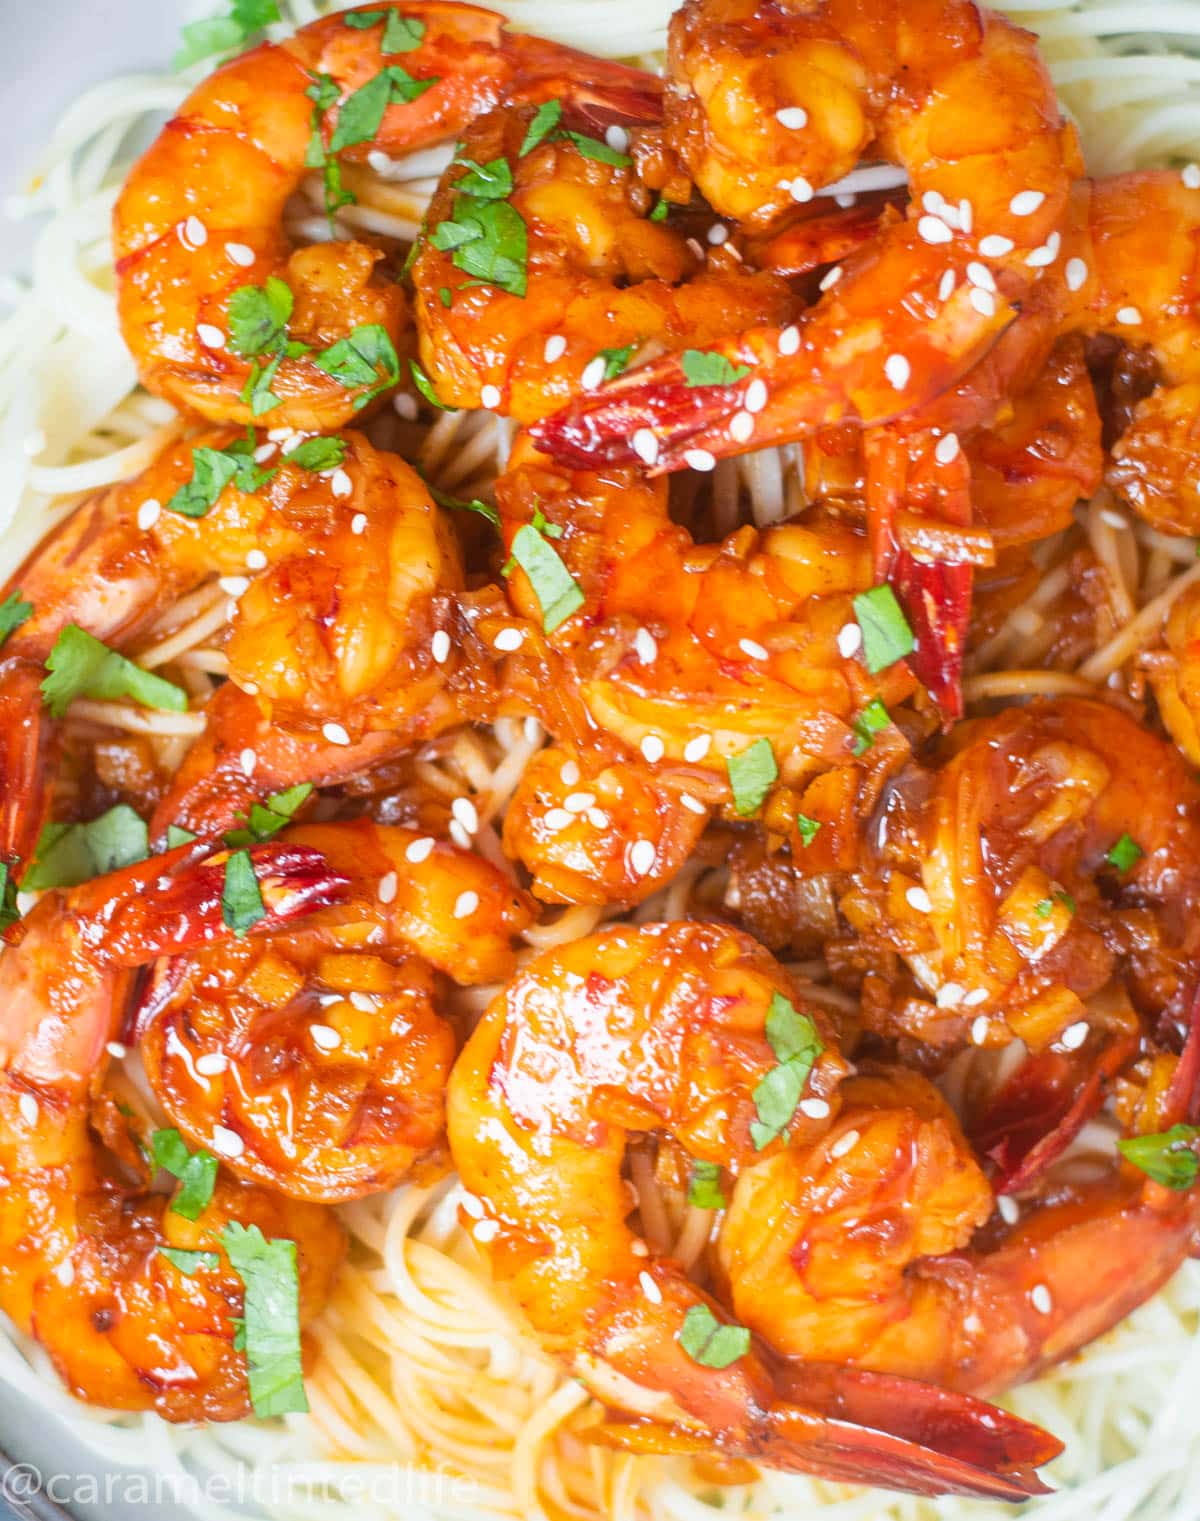 Prawns in honey garlic chili sauce on a bed of noodles